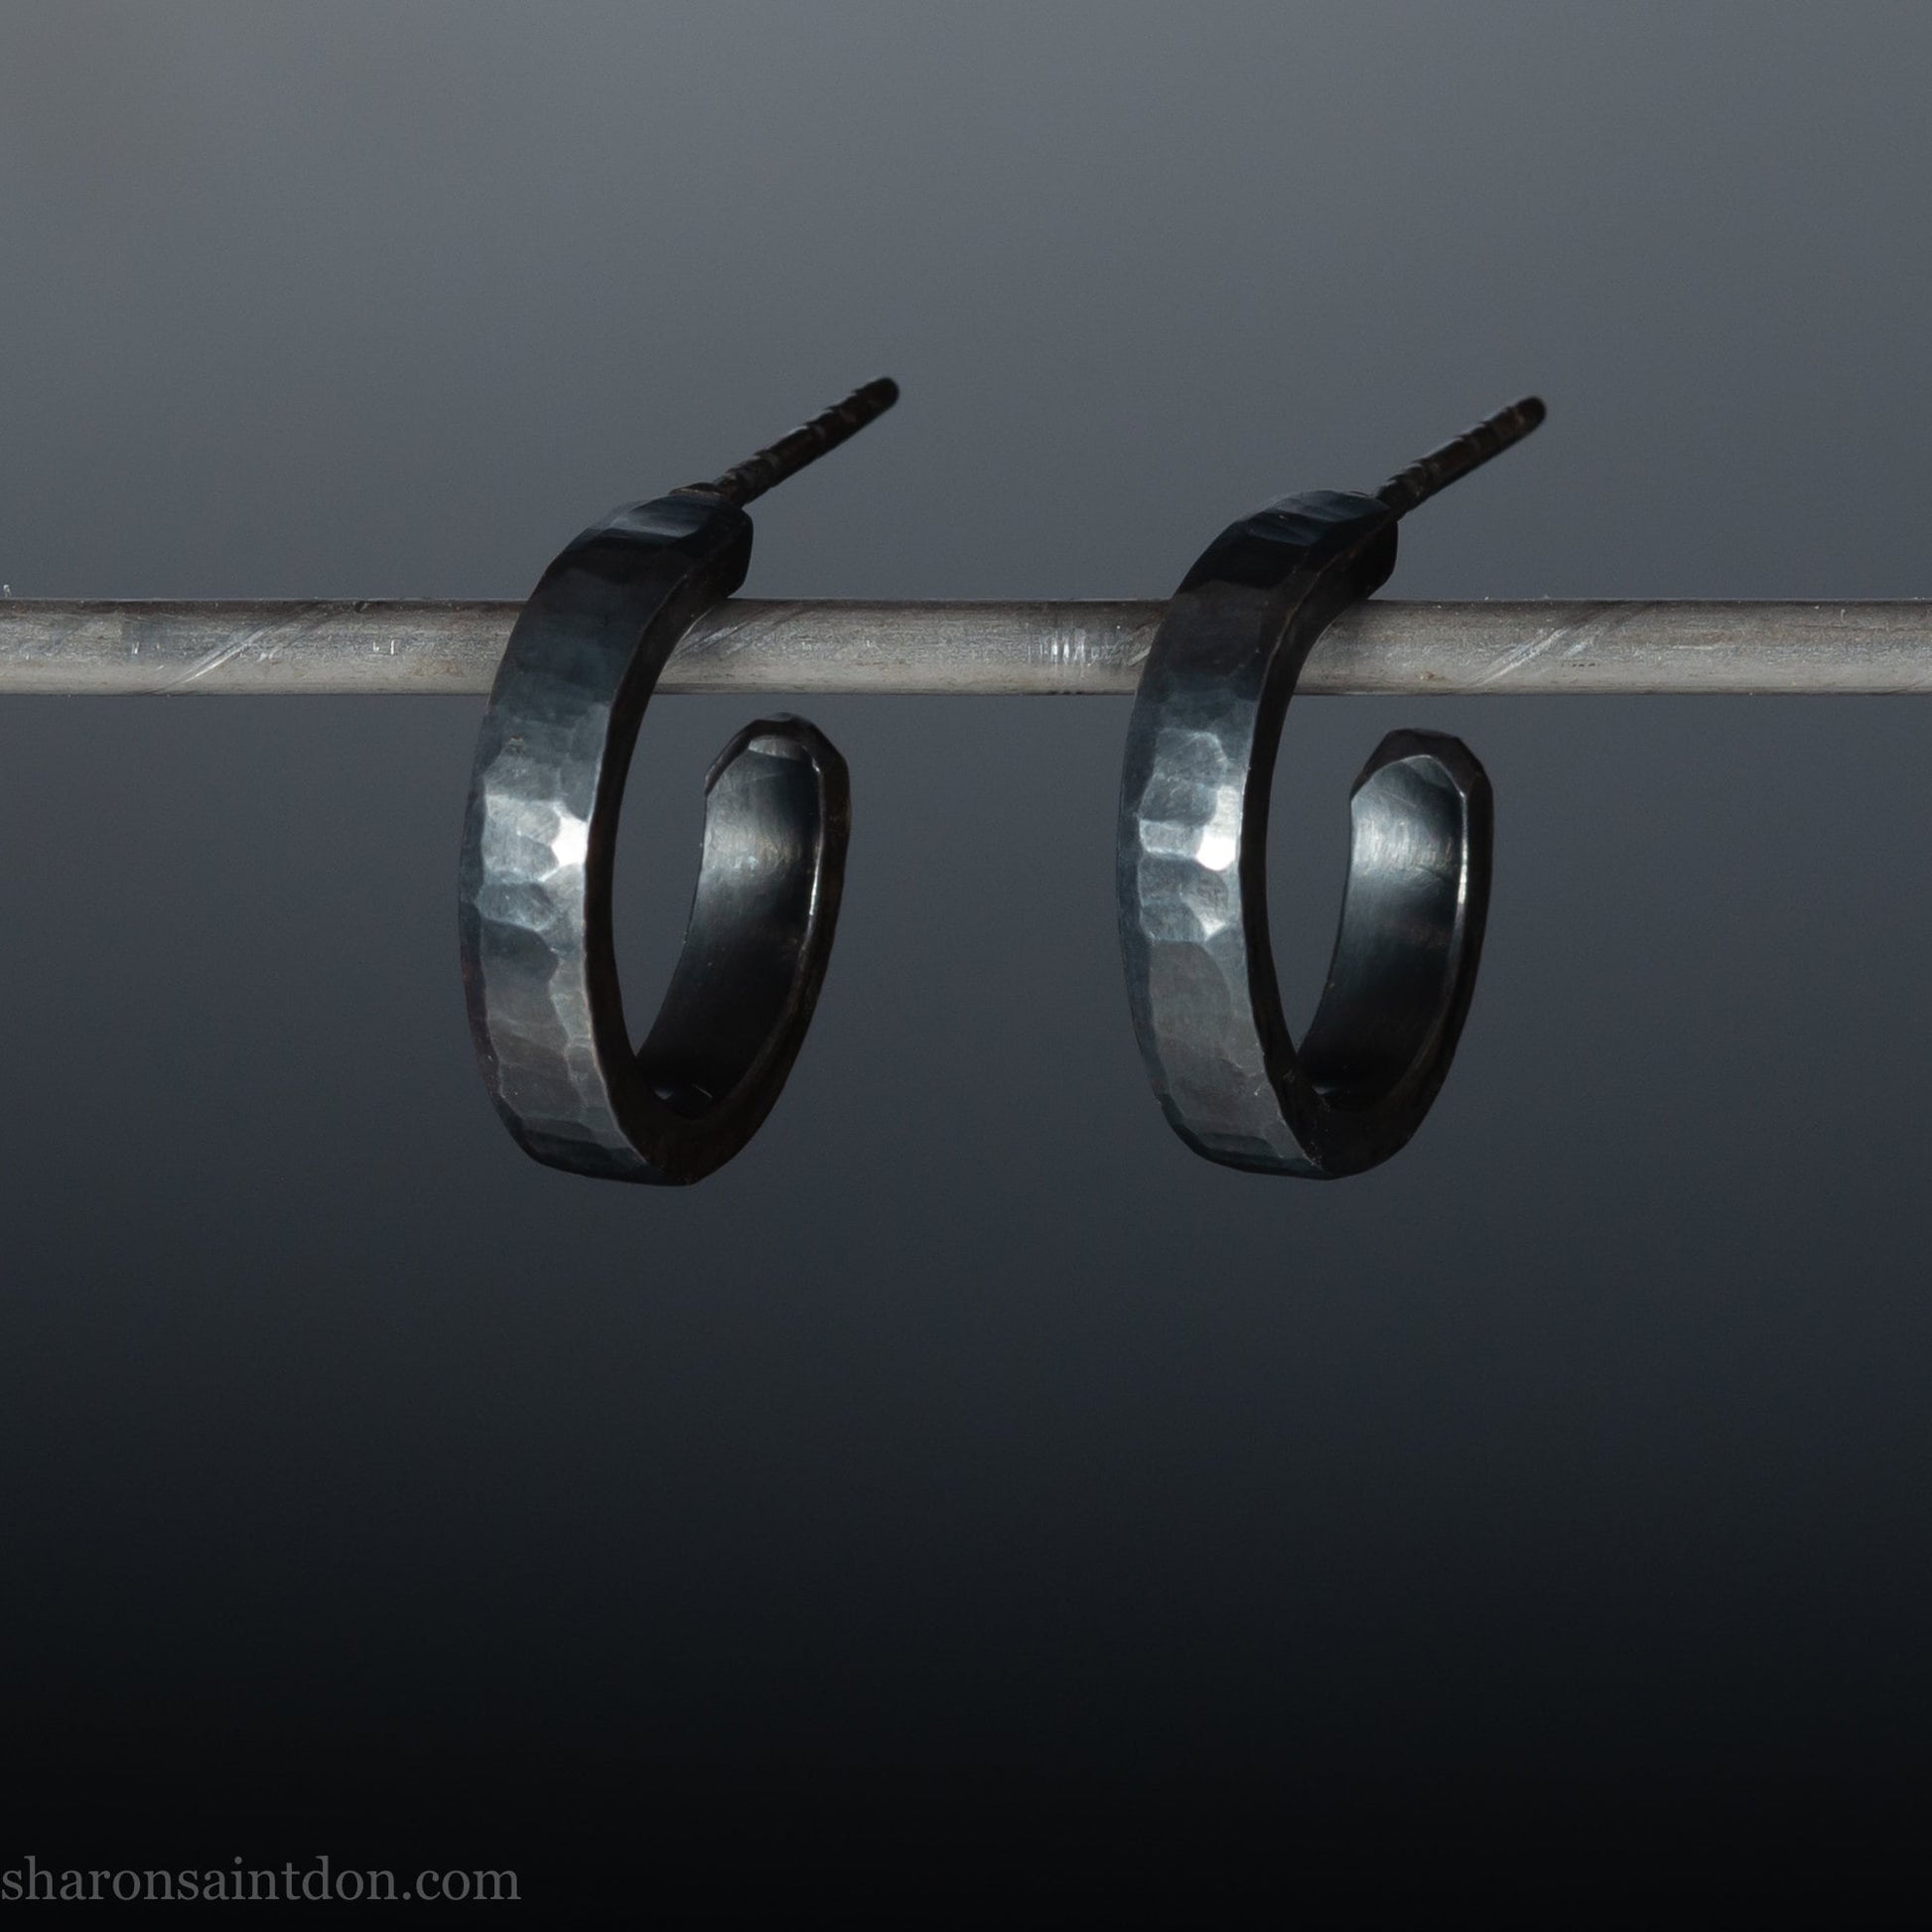 925 sterling silver hoop earrings for men or women, handmade in North America by Sharon SaintDon. 18mm diameter x 3mm wide, small, round, oxidized black with hammered texture.